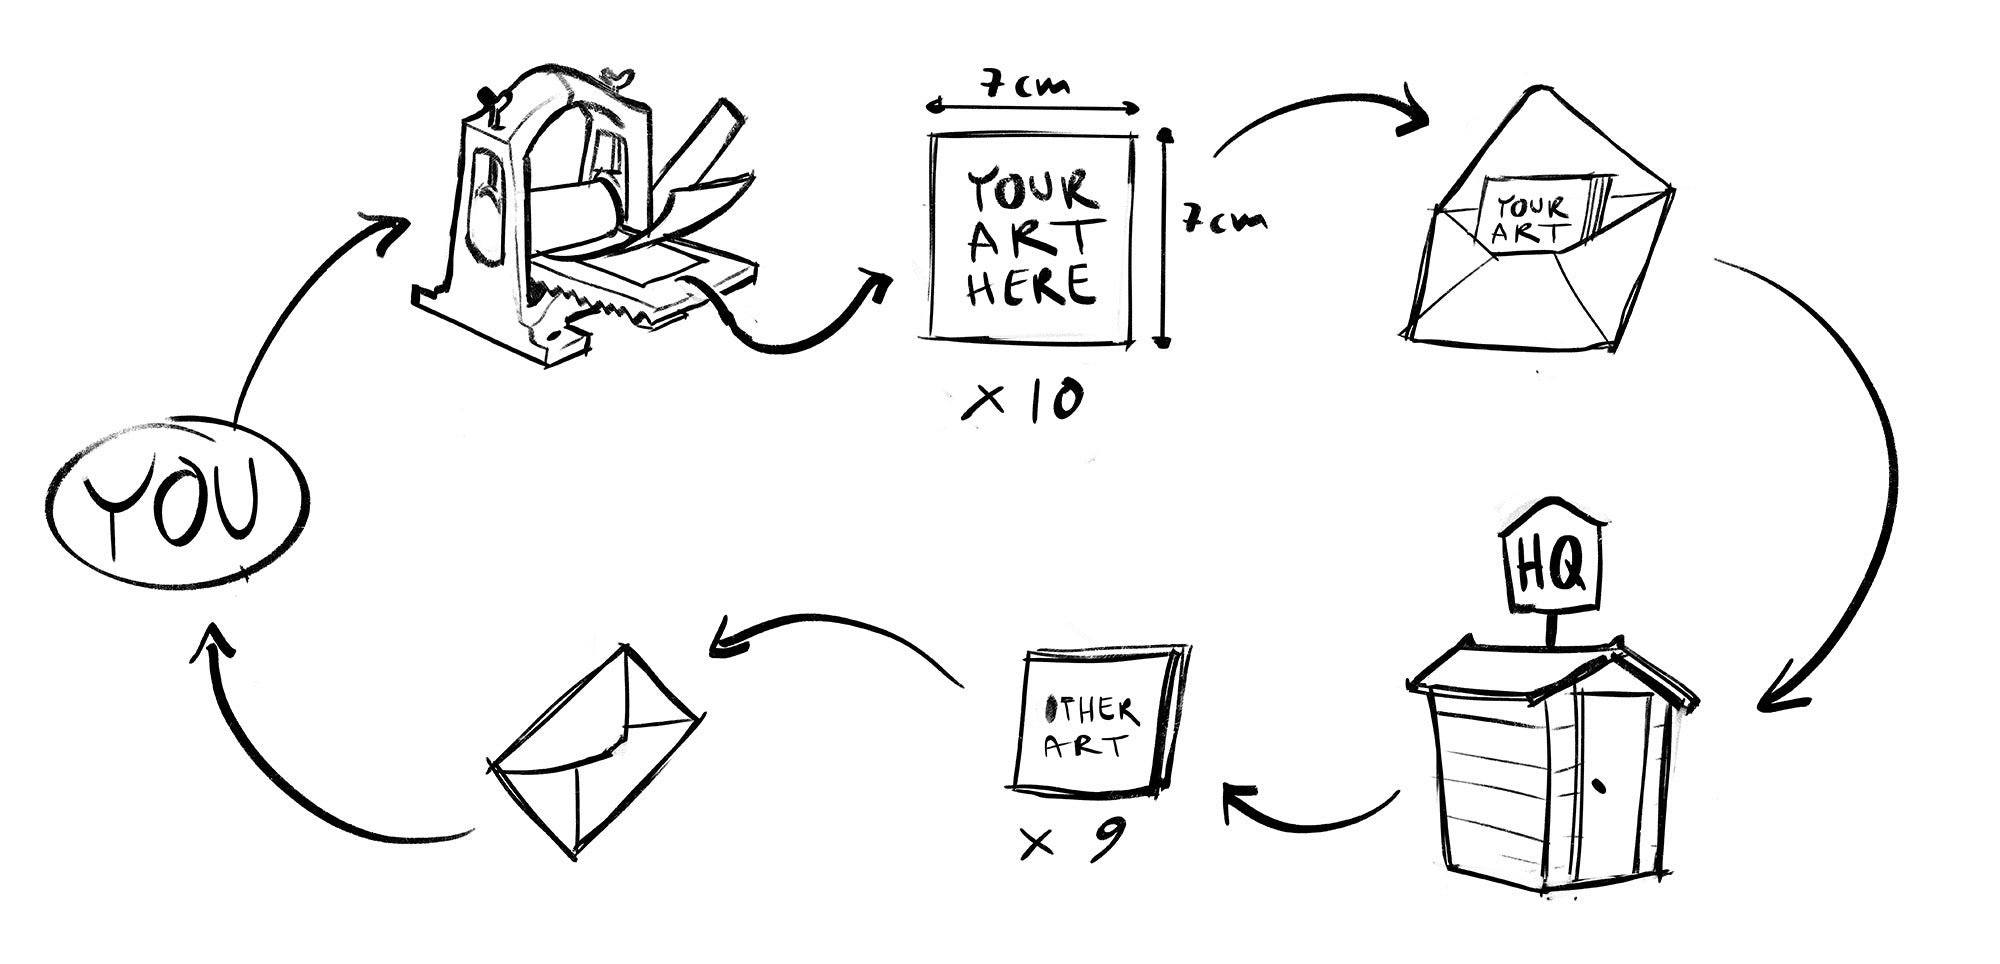 A diagram of how the Open Print Exchange works.